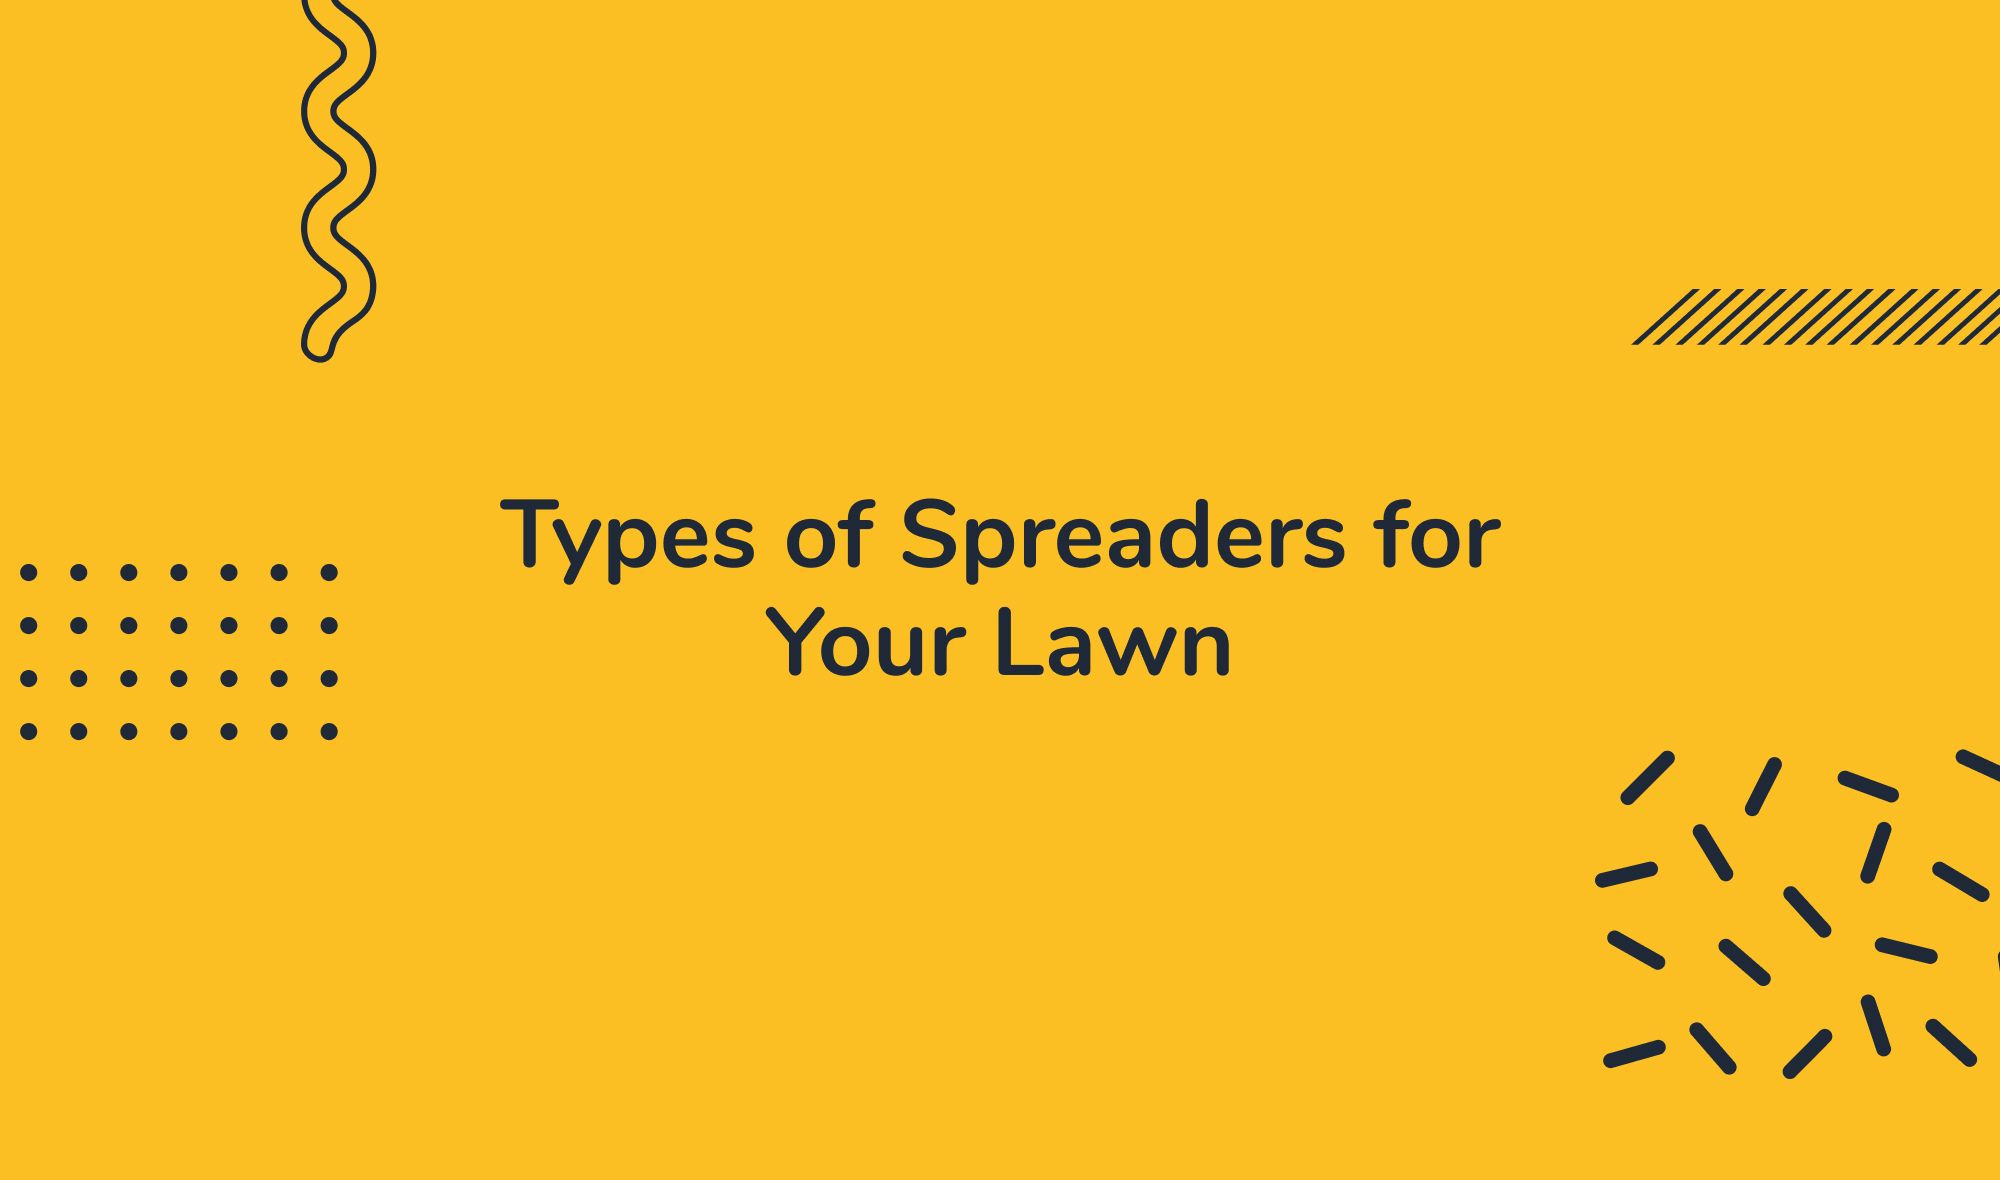 Types of Spreaders for Your Lawn